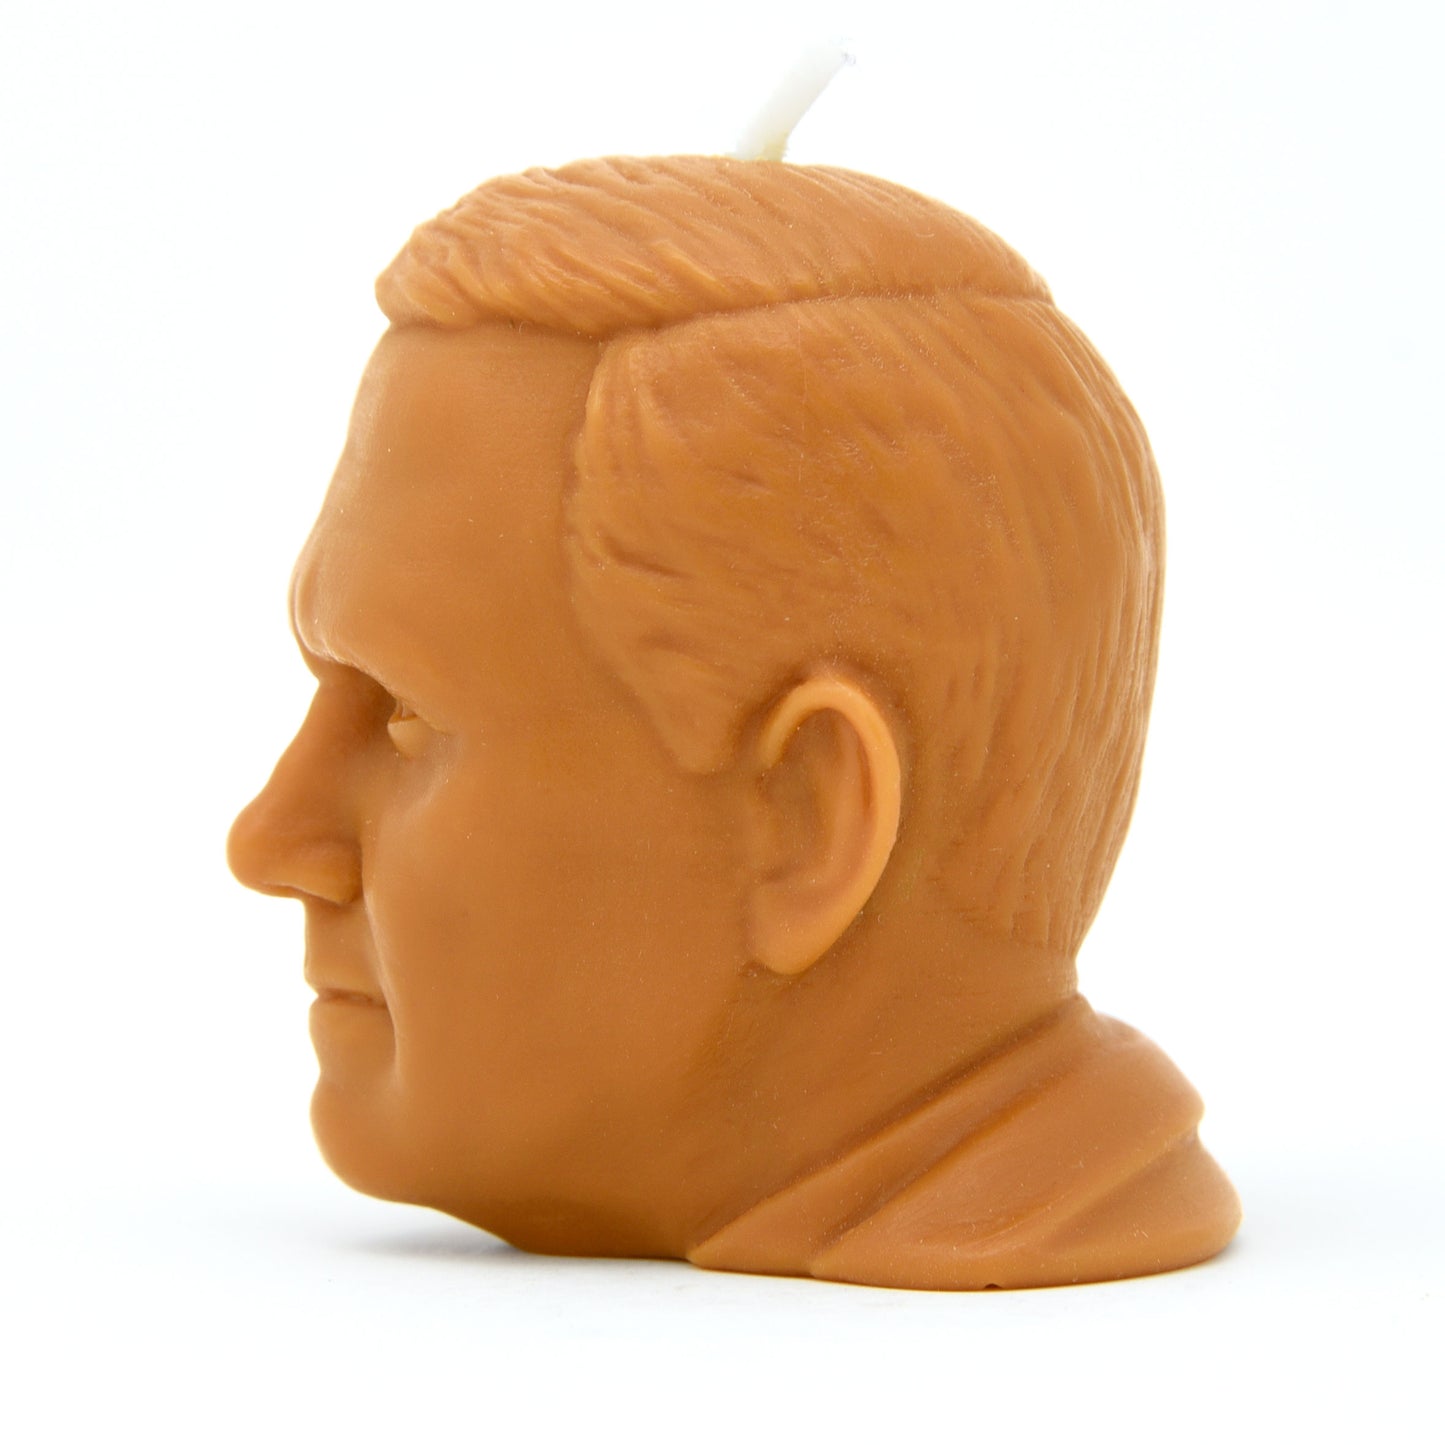 Mike Pence Candle